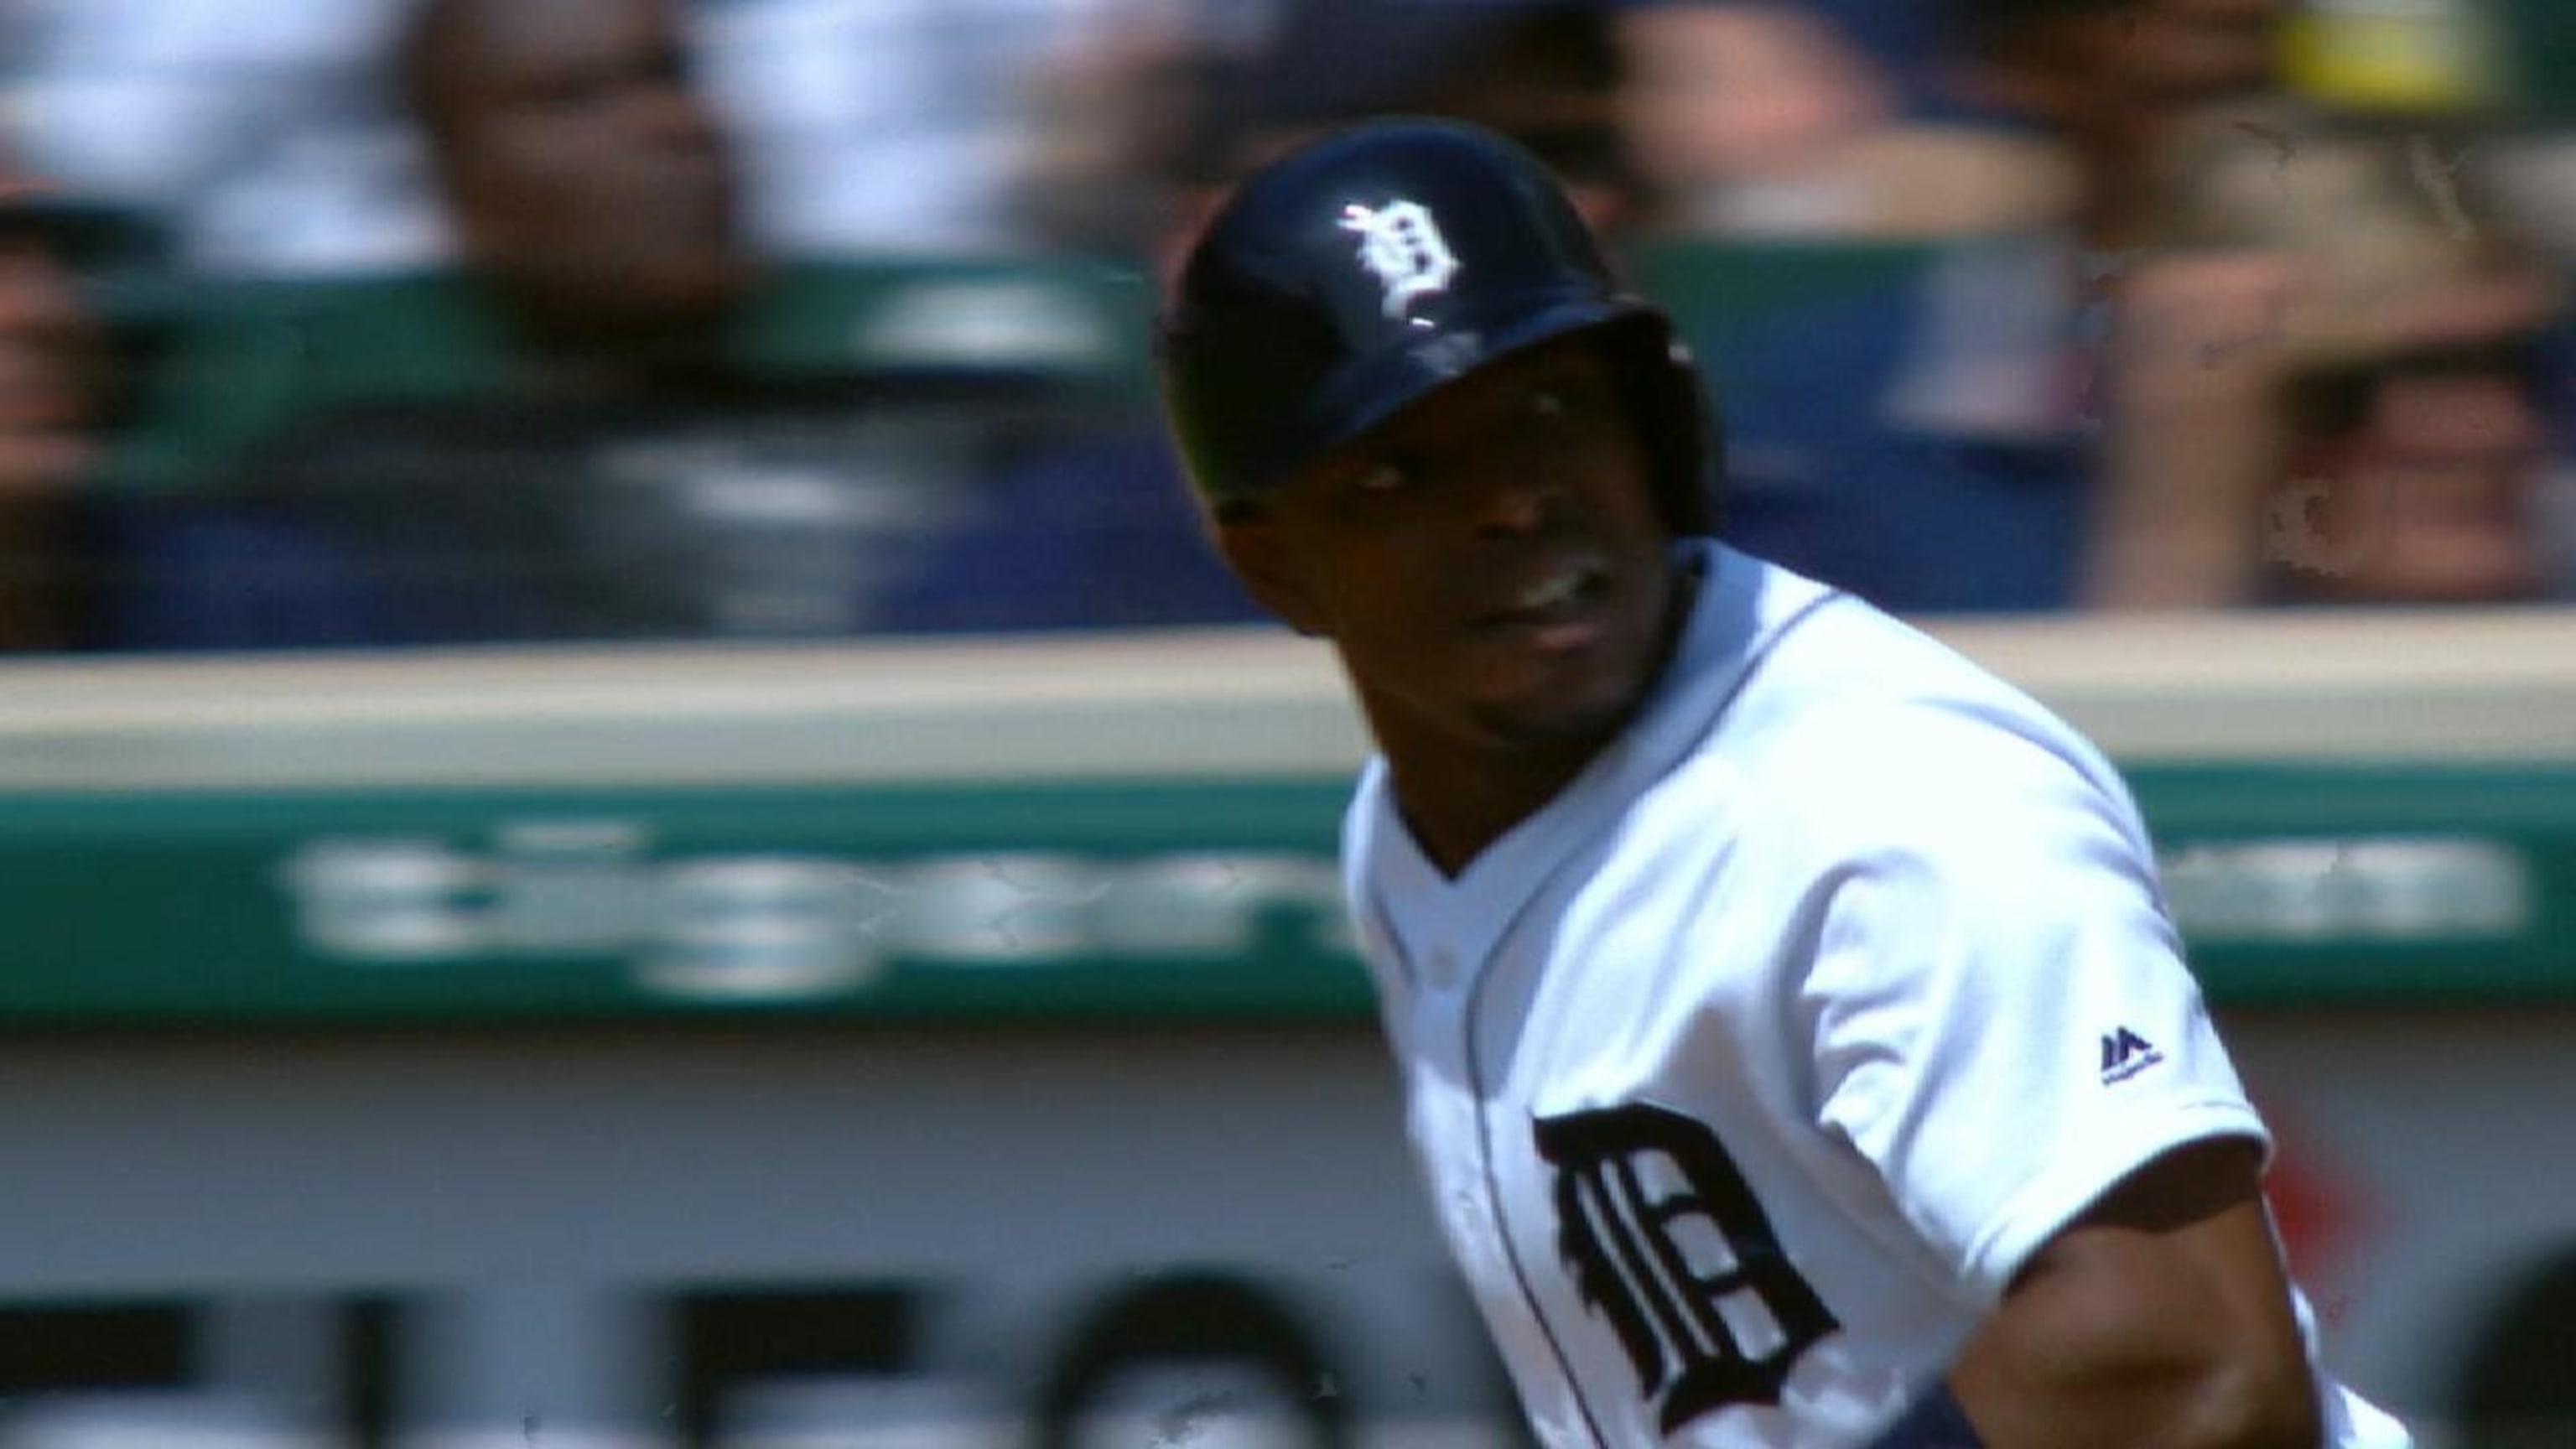 As Angels gear up with Justin Upton, Tigers brace for lengthy rebuild